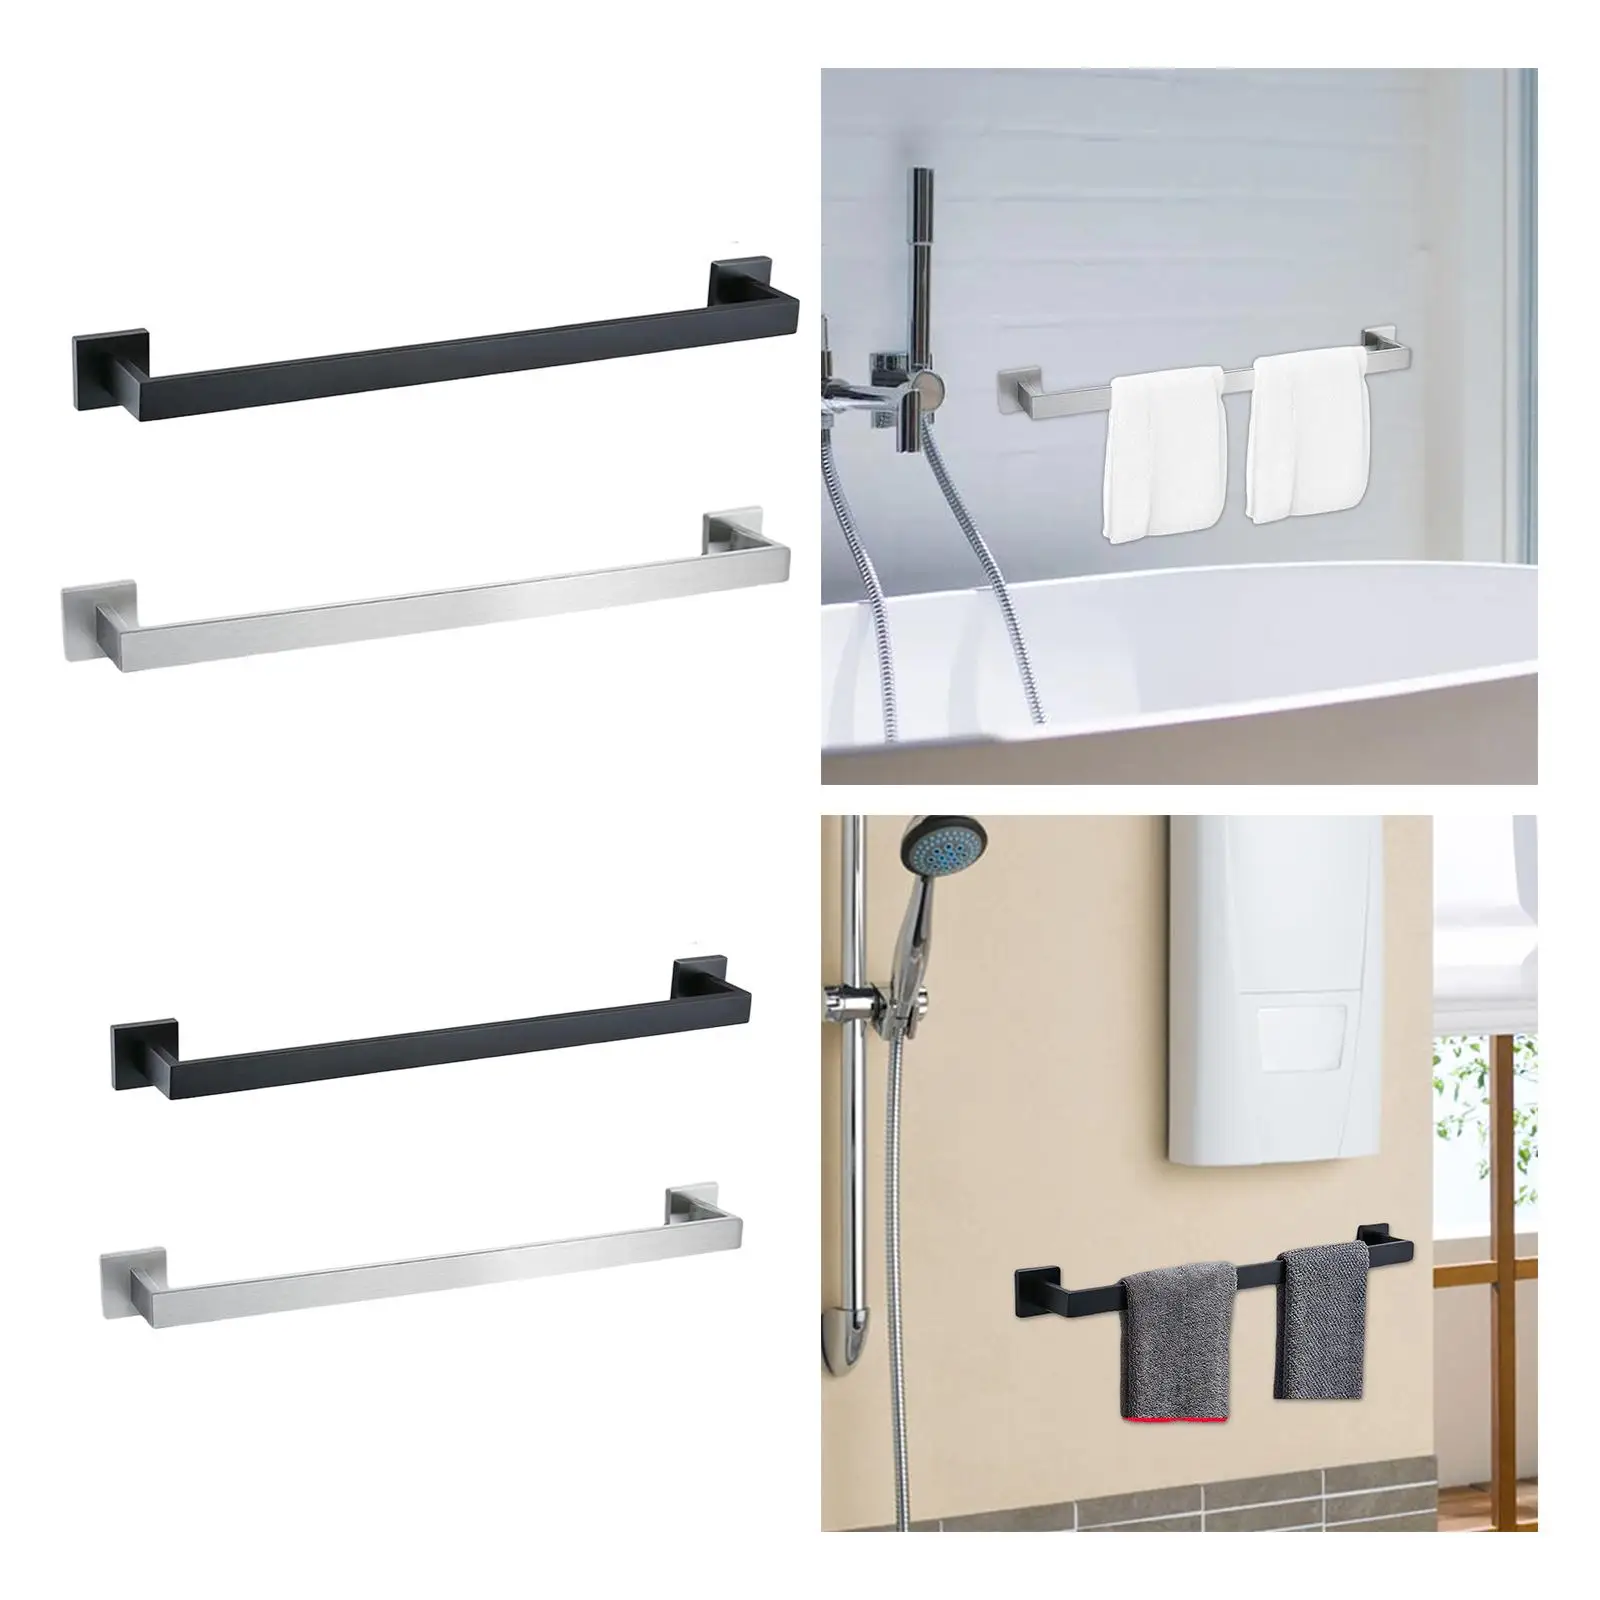 Durable Towel Rack Holder Space Saving Stand Wall Mounted Rustproof Organizer for Bathroom Hotel Kitchen Hanging Robe Shower